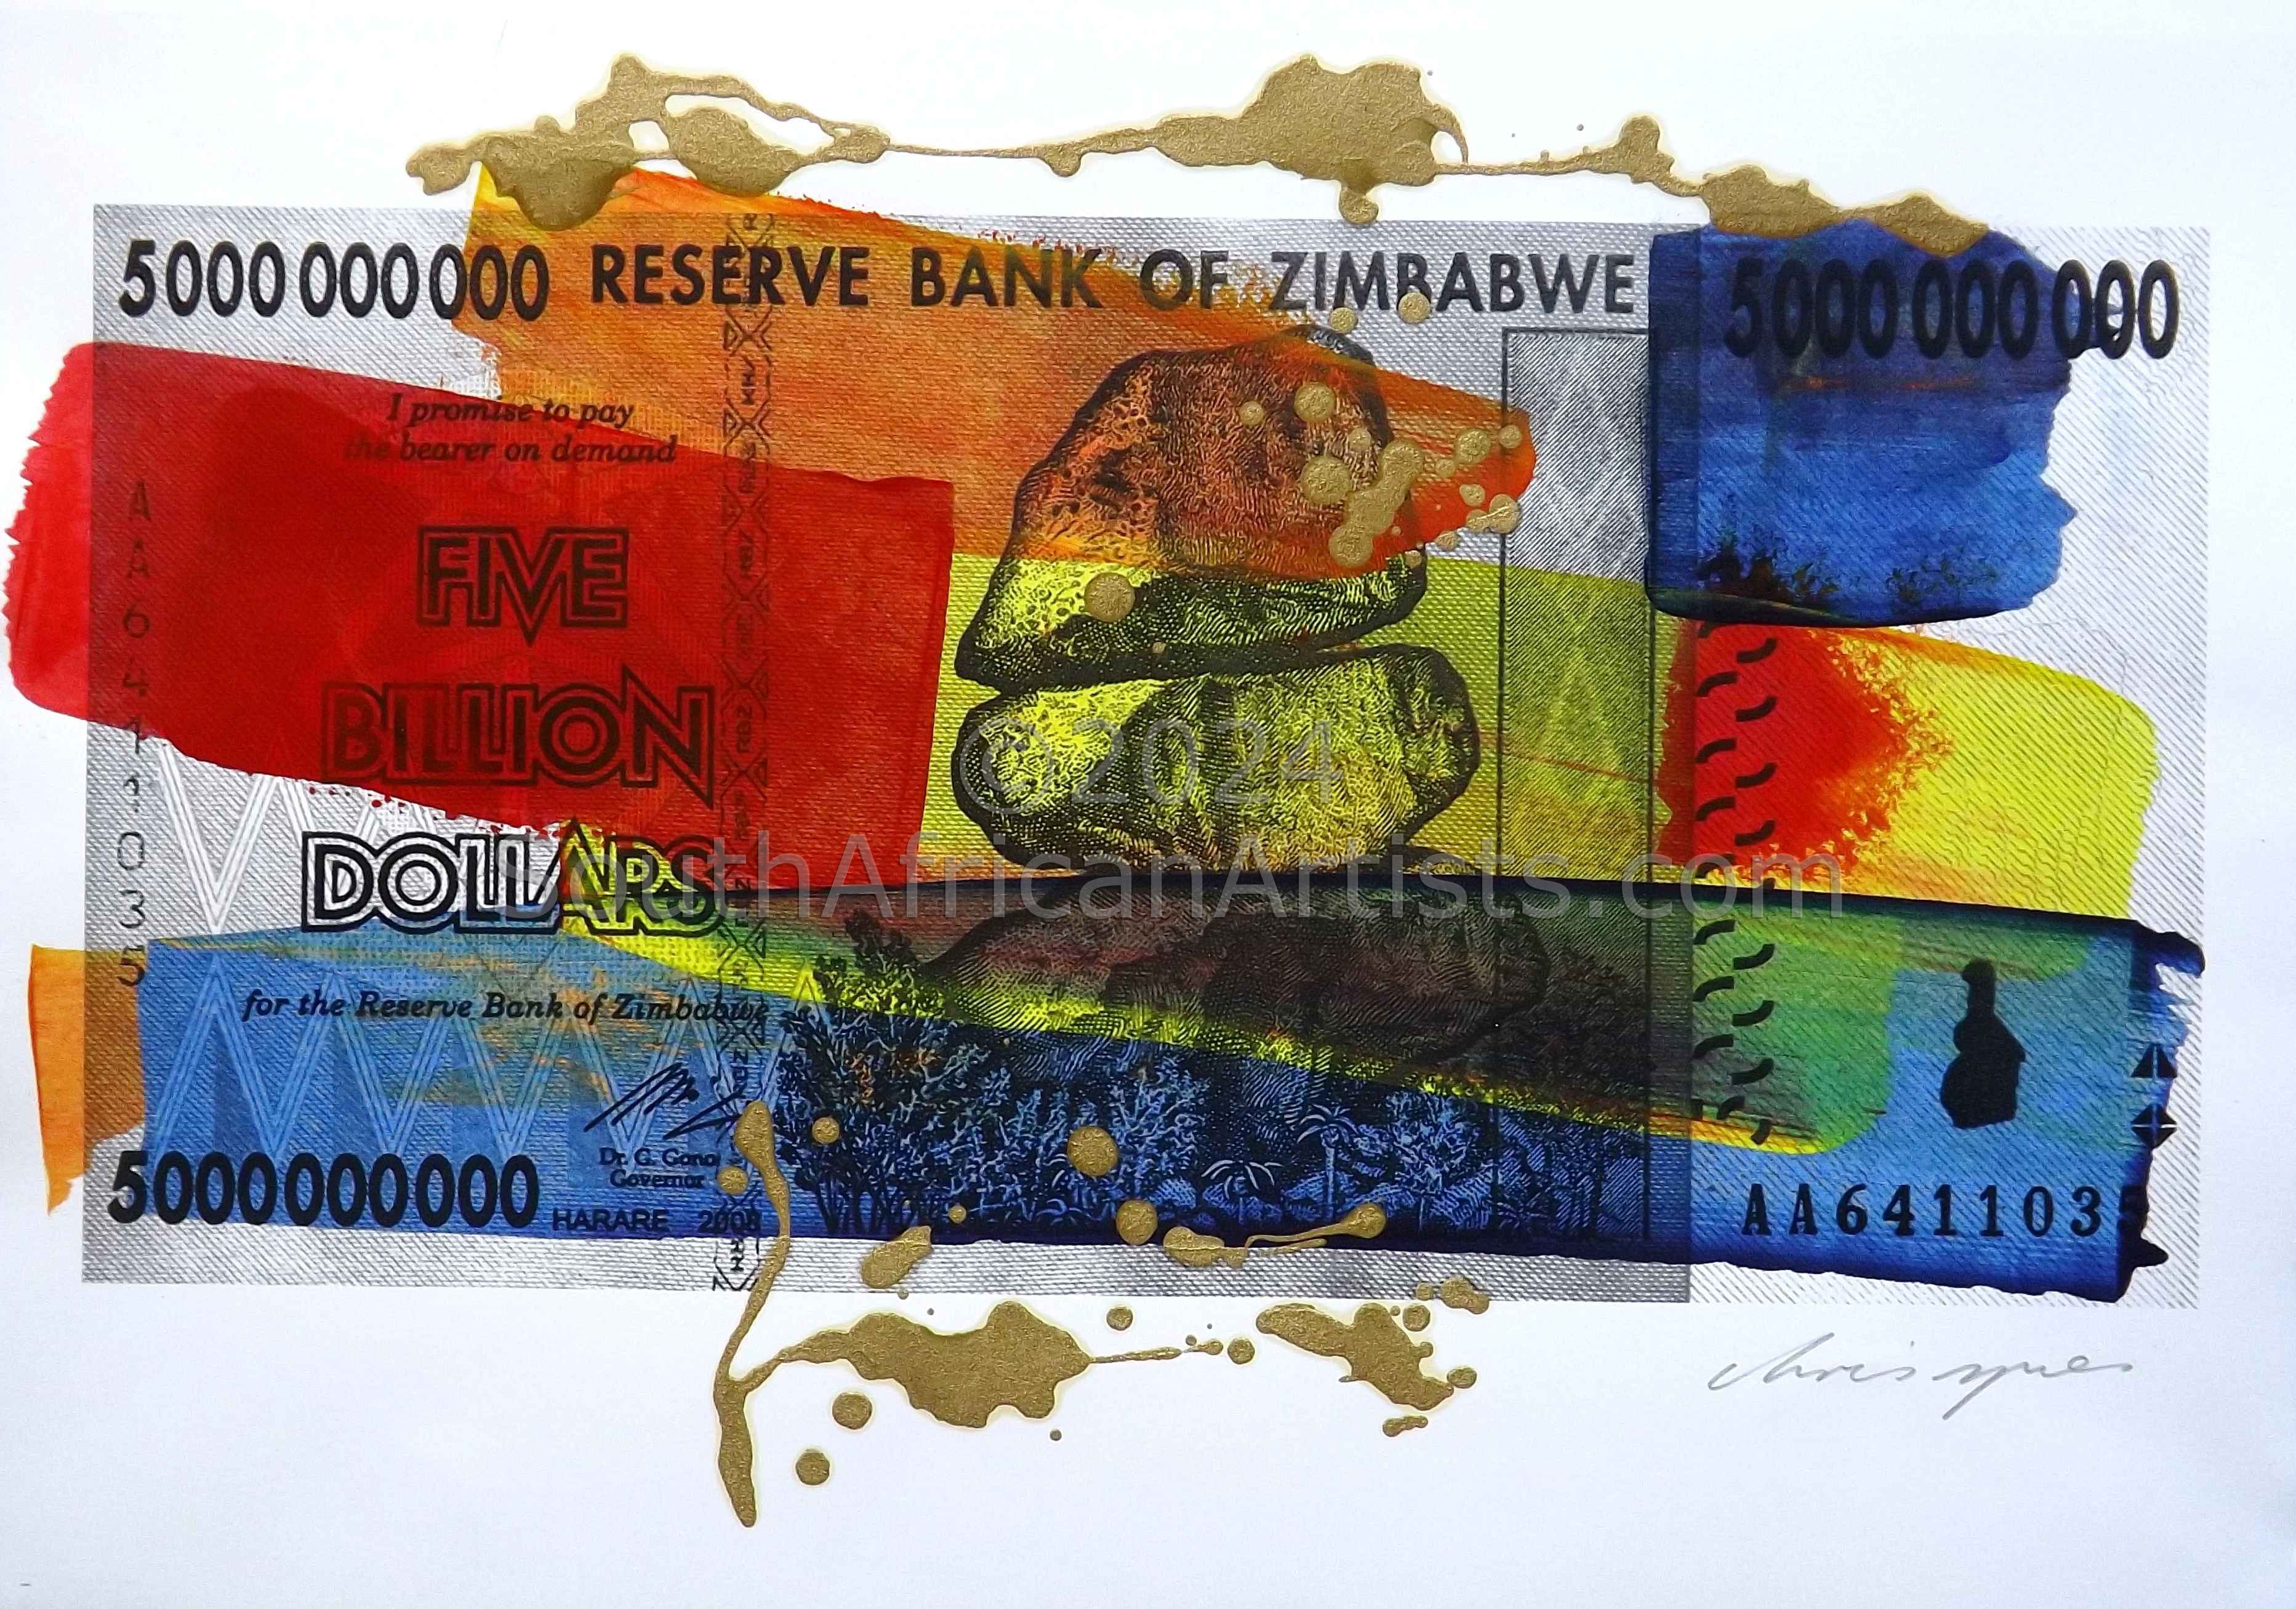 Five Billion Dollar Note Two Only in Africa